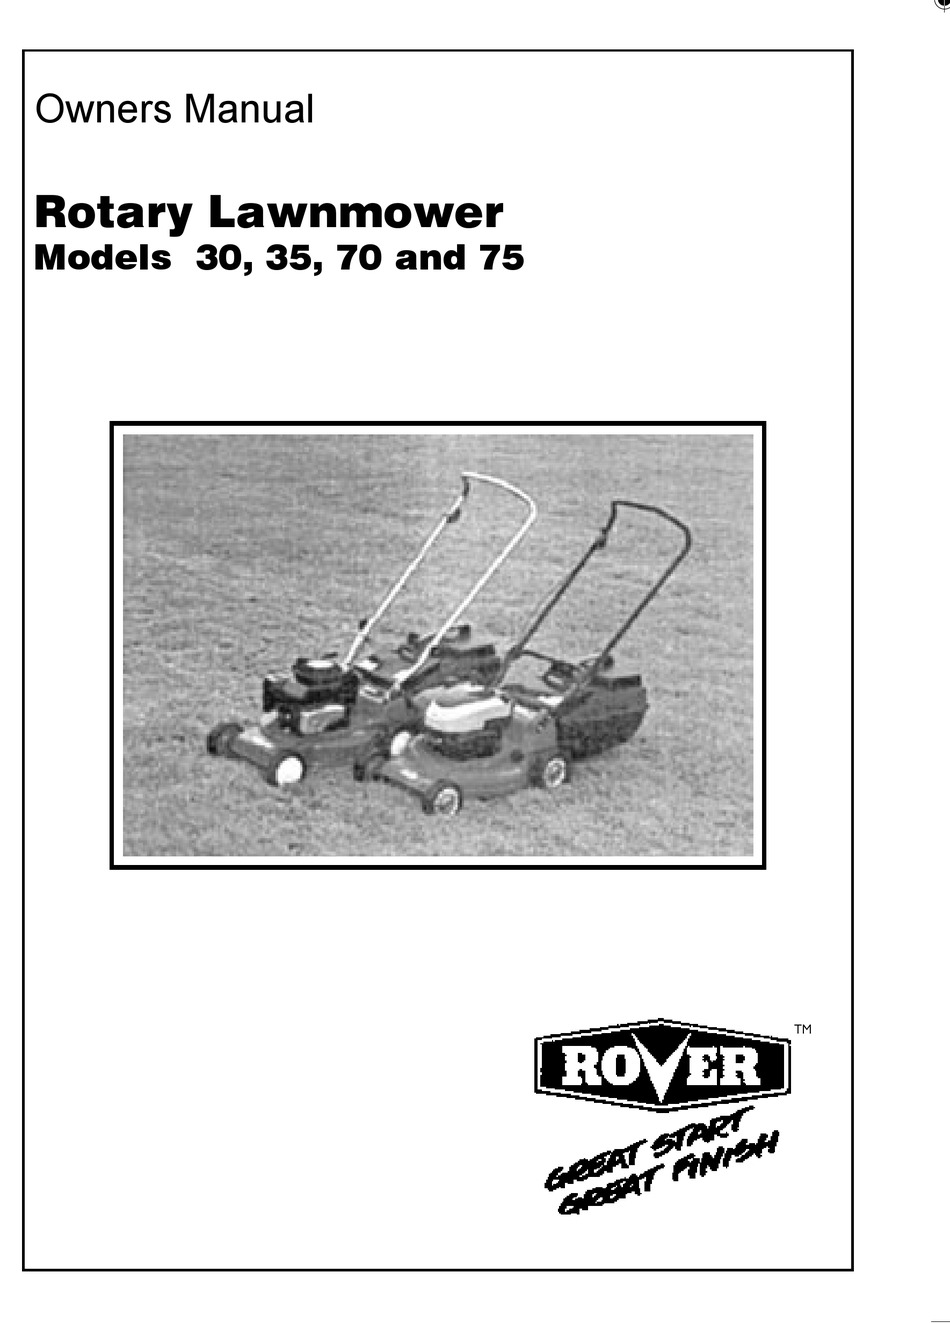 Rover Ranger XC 52150 52155 Ride-on Mower 15 page Owners Manual CD PDF DISC 